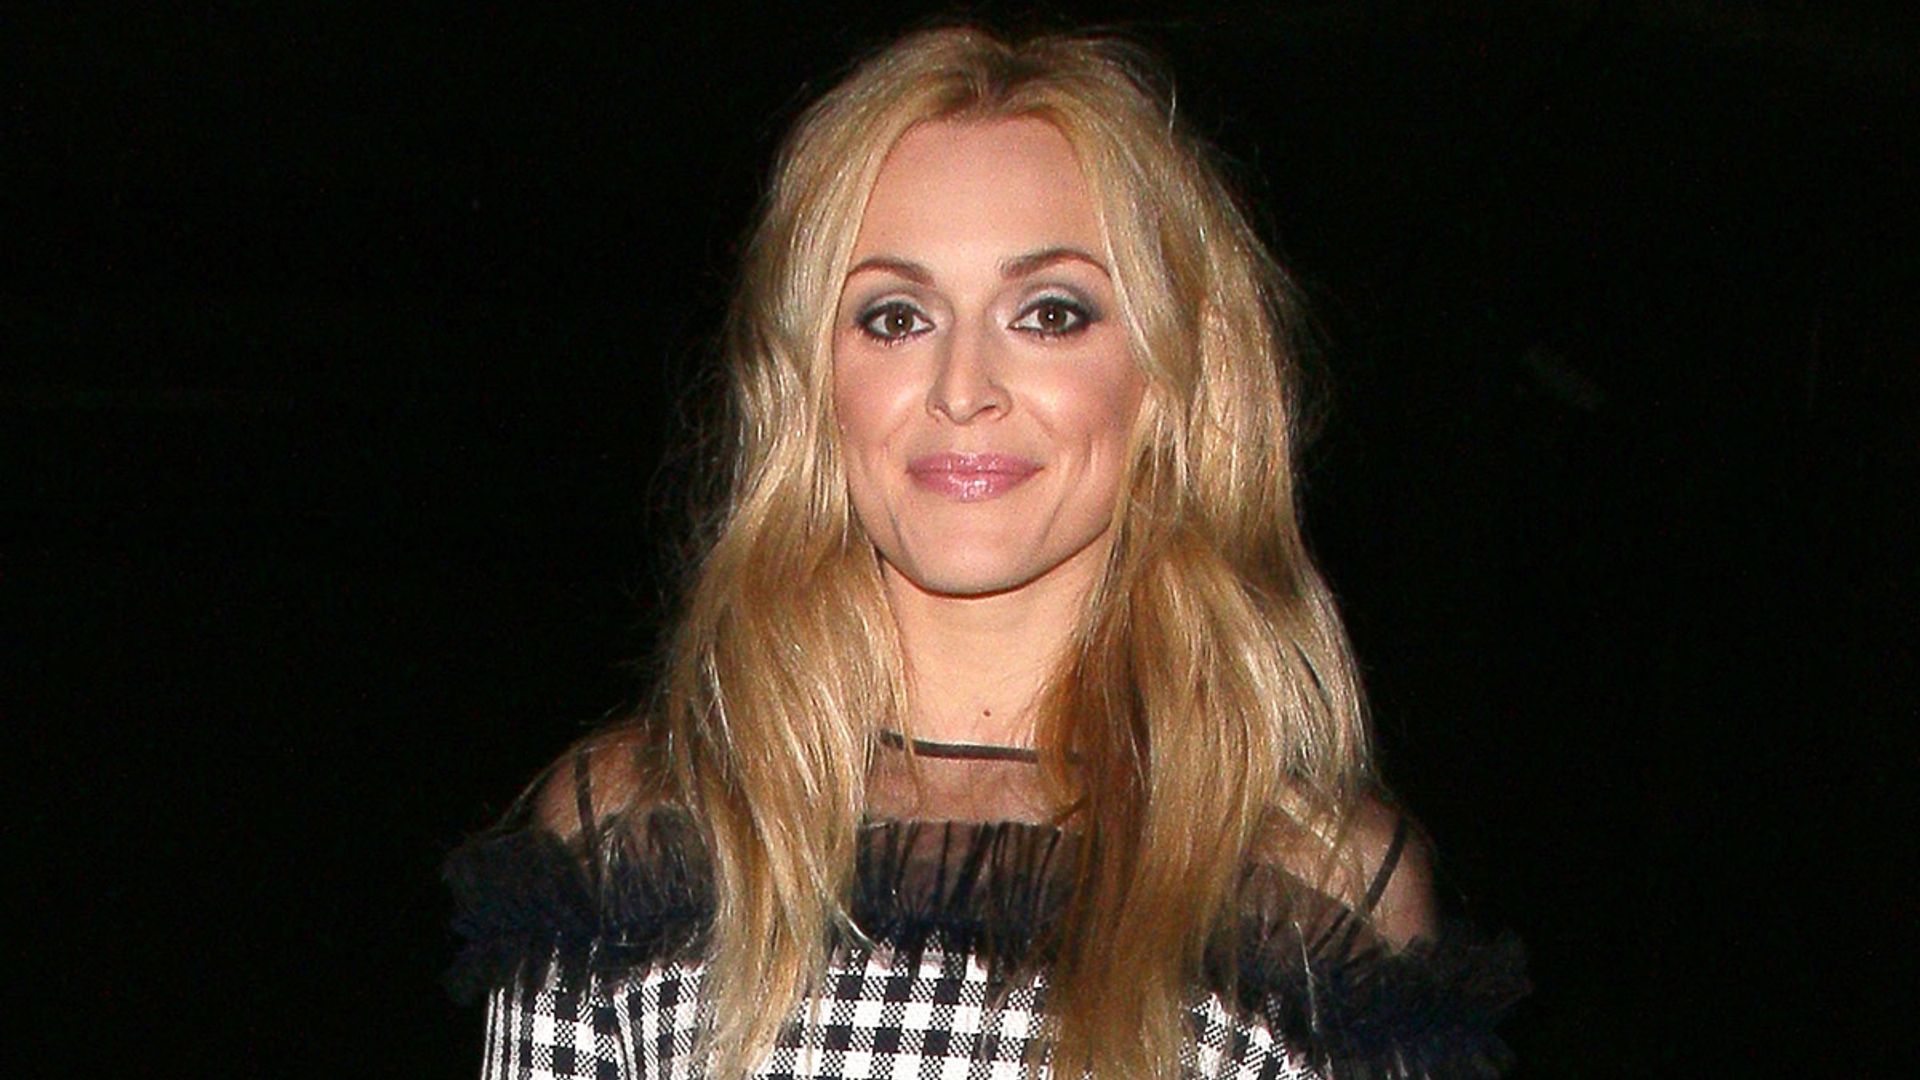 Fearne Cotton shares beautiful pictures of her daughter to mark her birthday